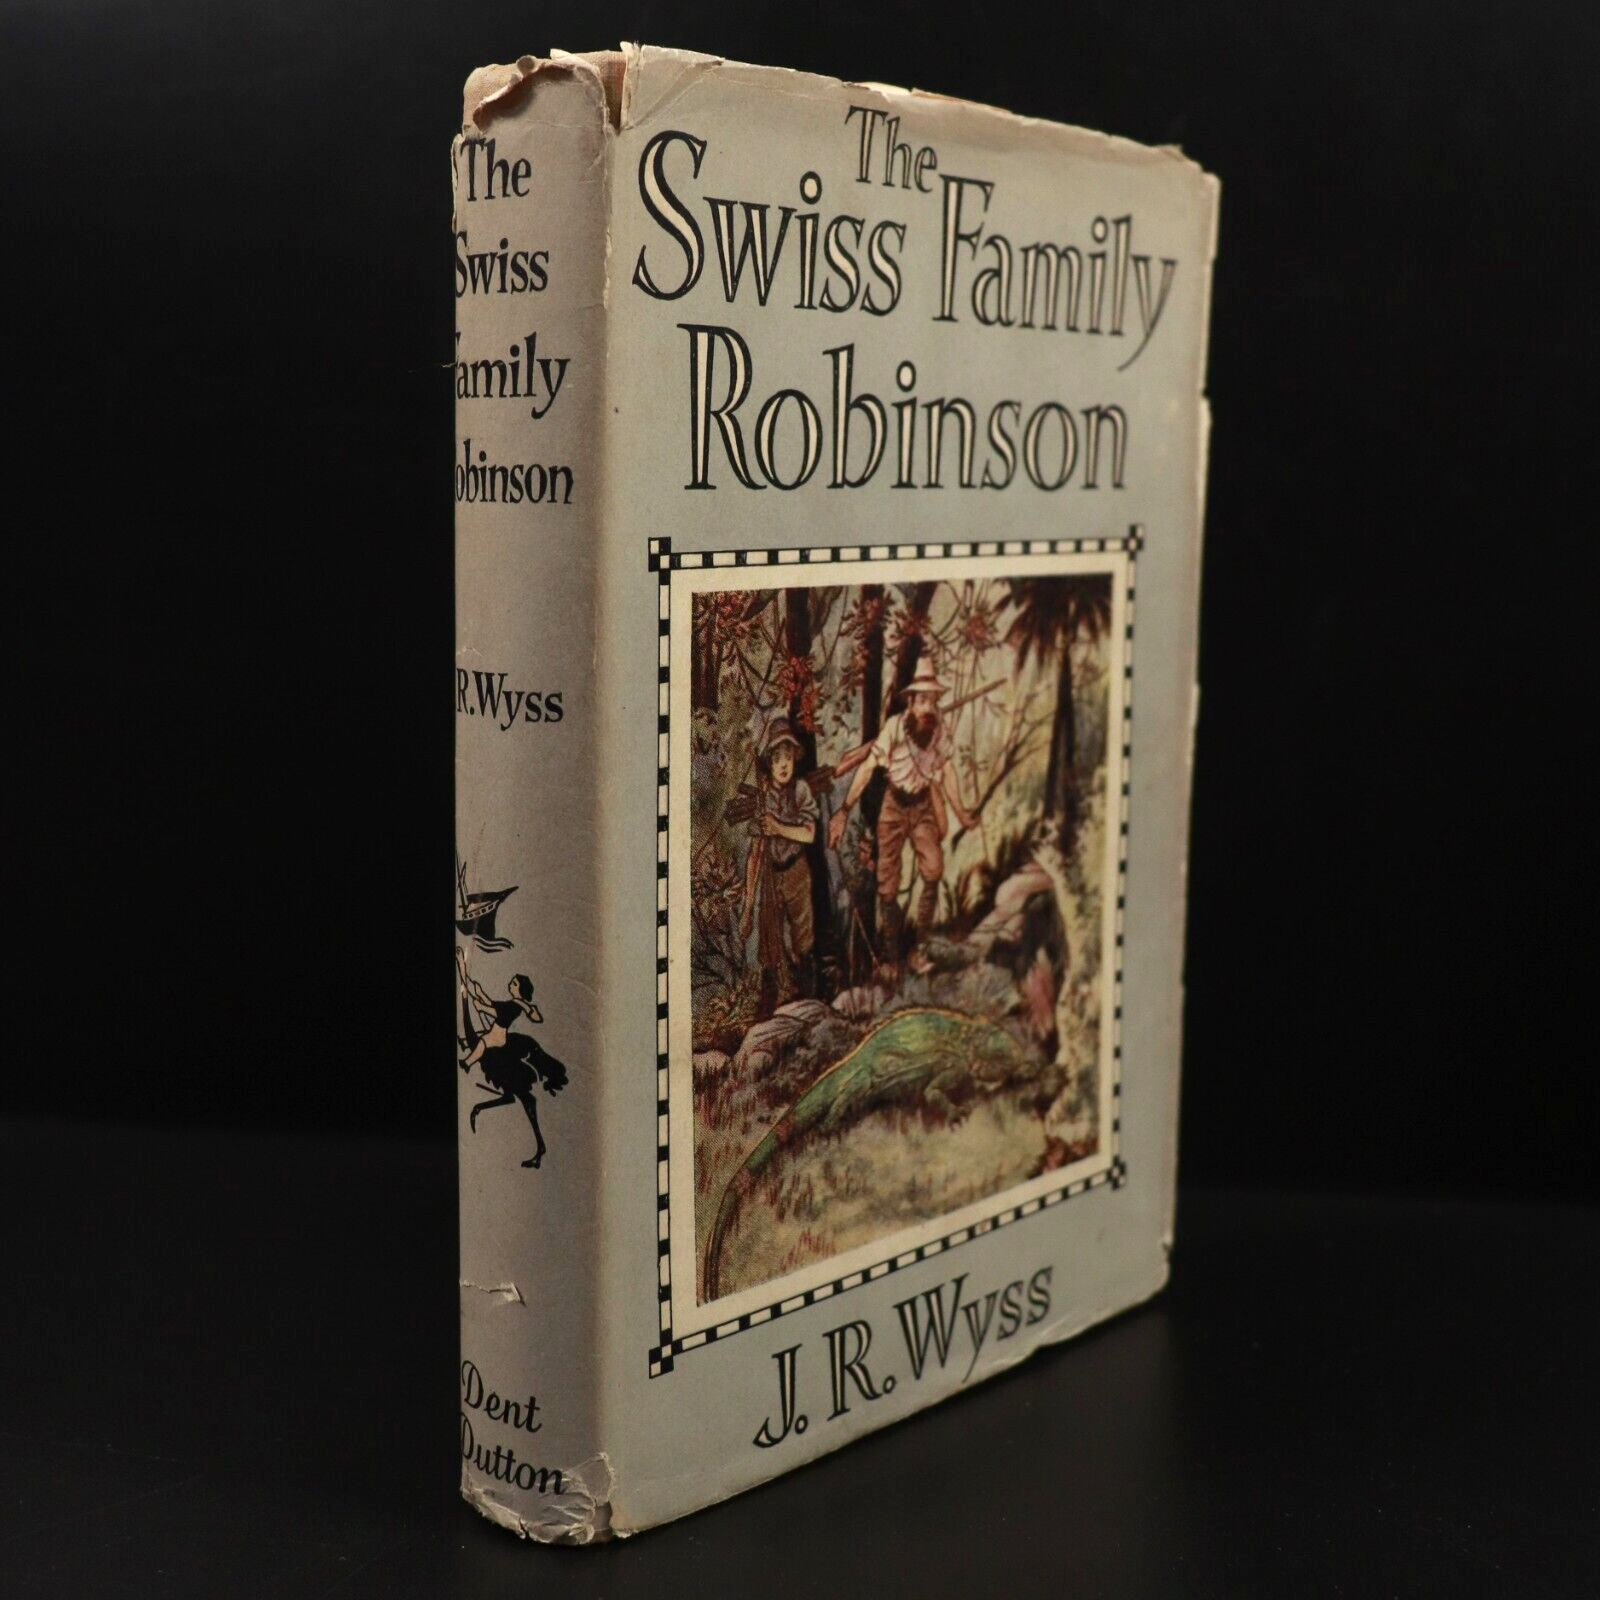 1954 The Swiss Family Robinson by J.R. Wyss Classic Childrens Fiction Book